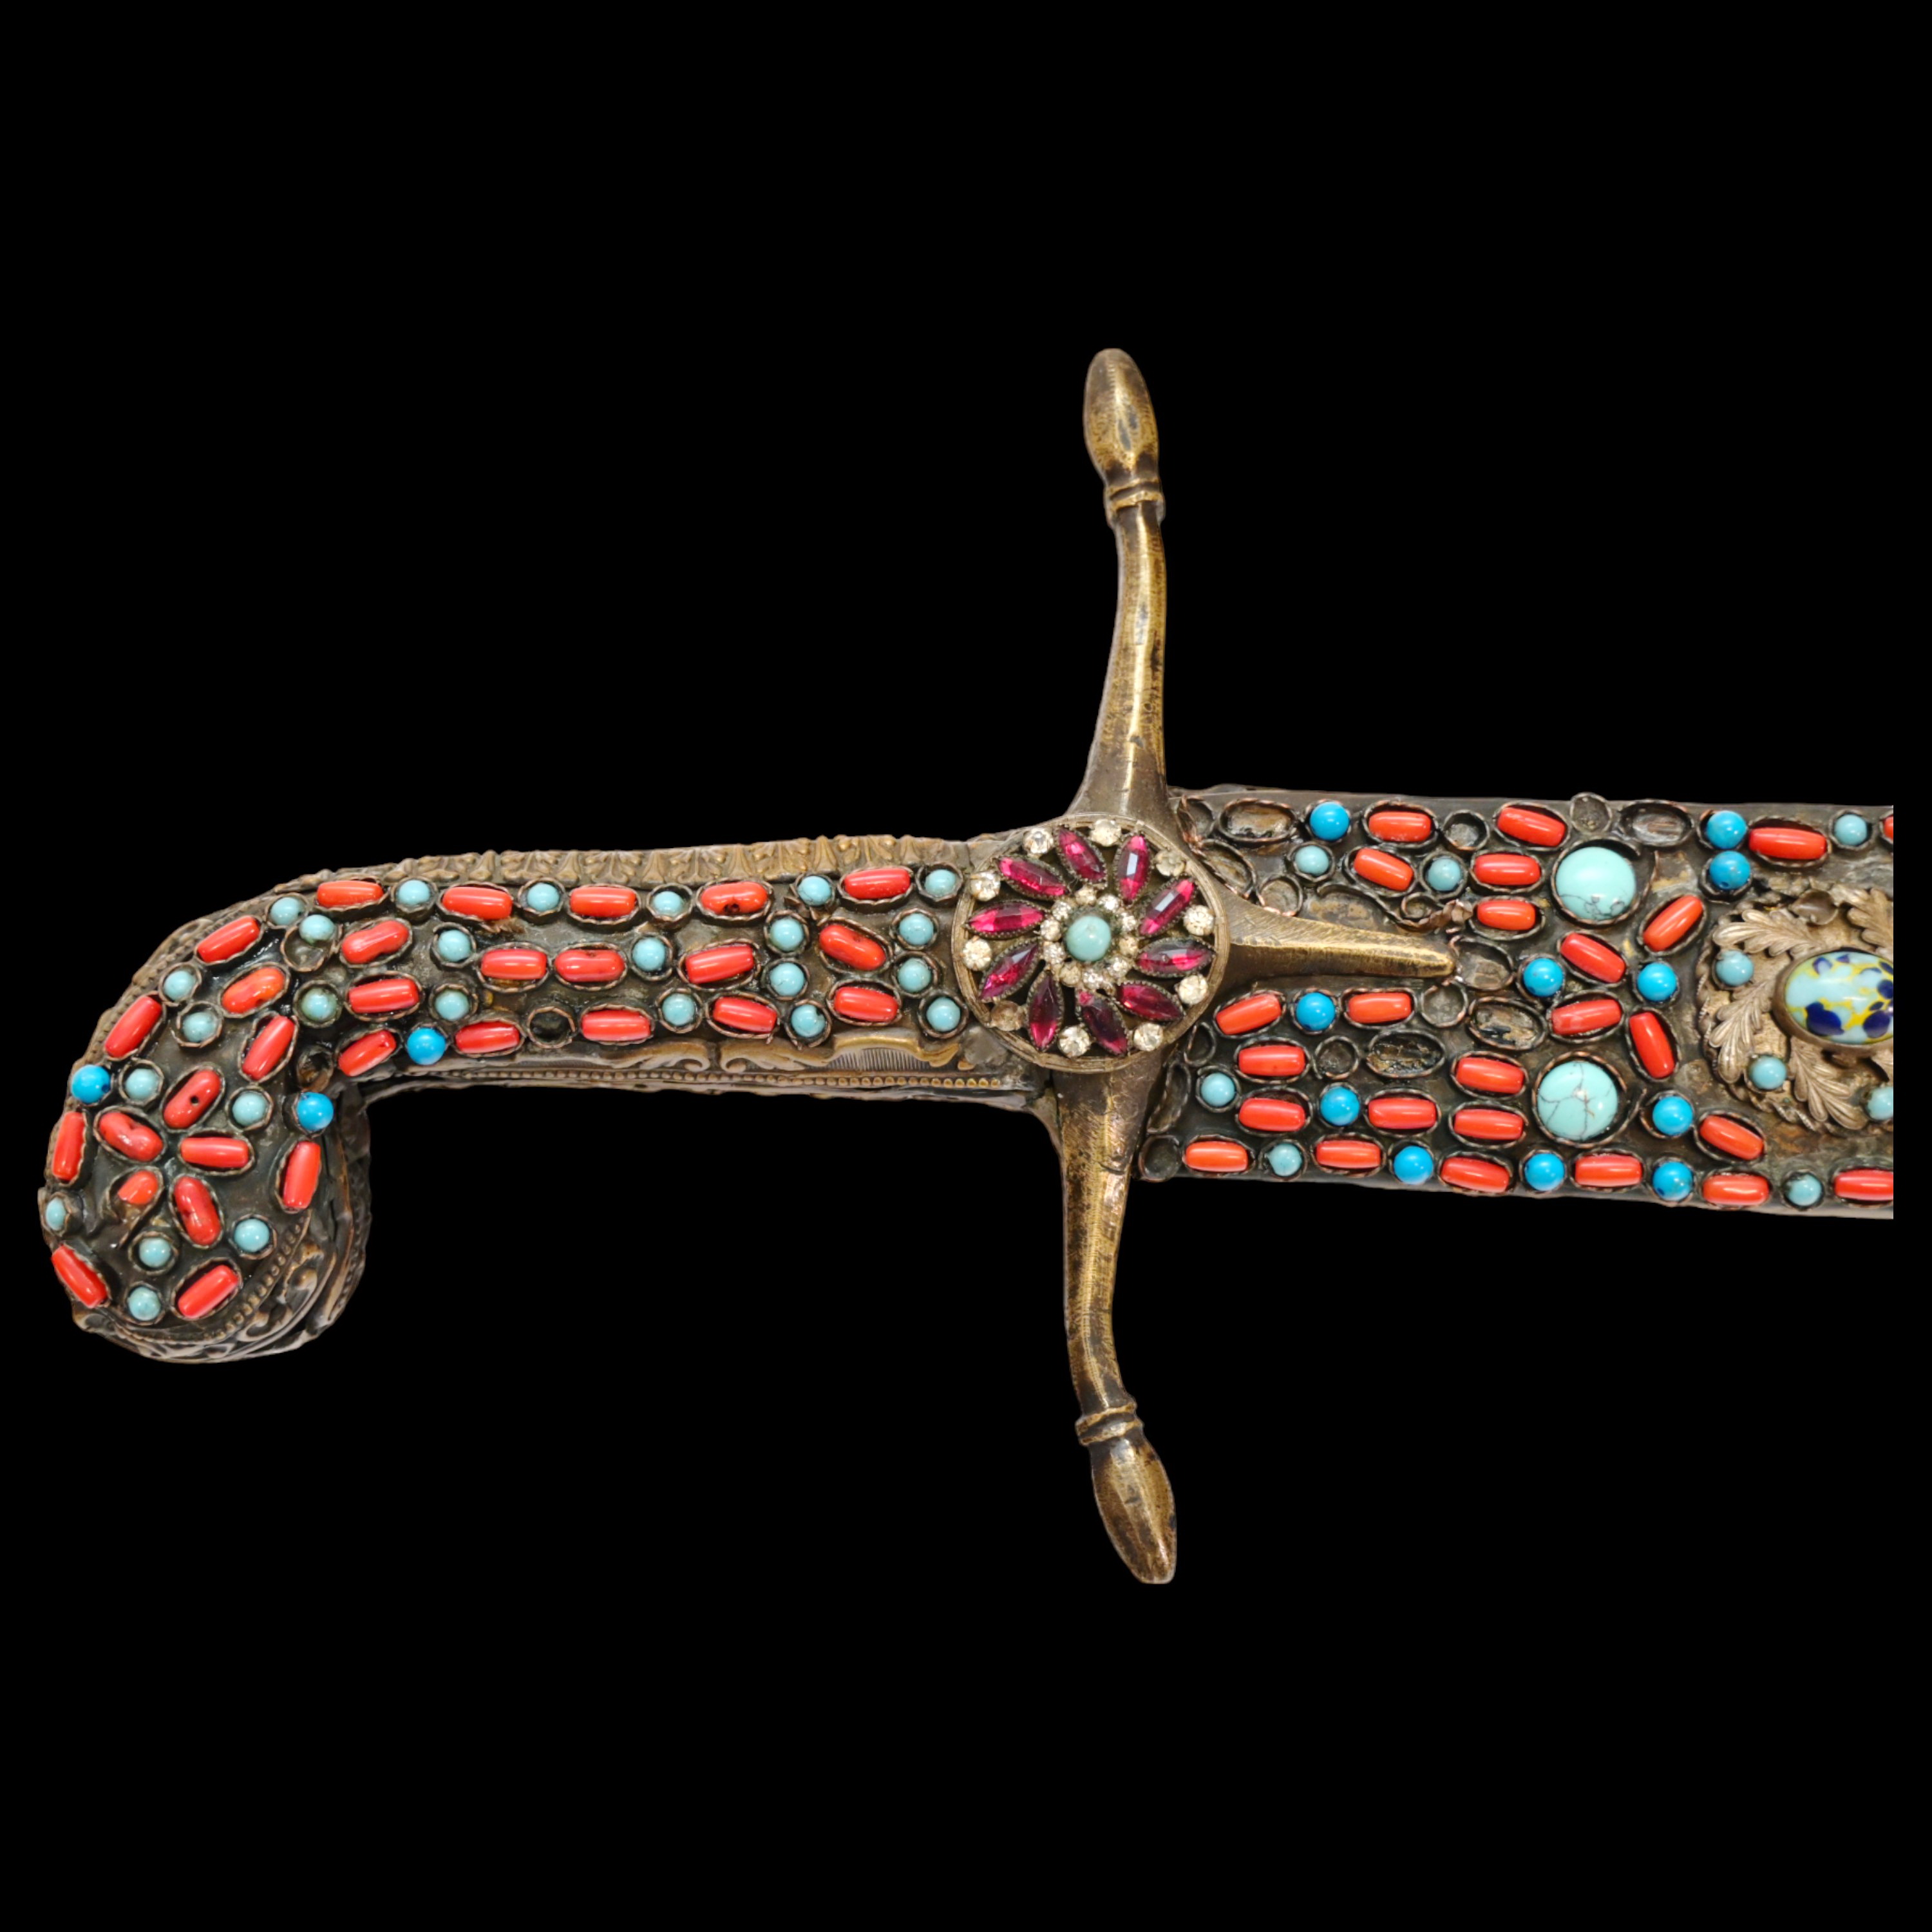 Rare Ottoman sword, Kilij, Pala, decorated with corals and turquoise, Turkey, Trabzon, around 1800. - Image 18 of 31